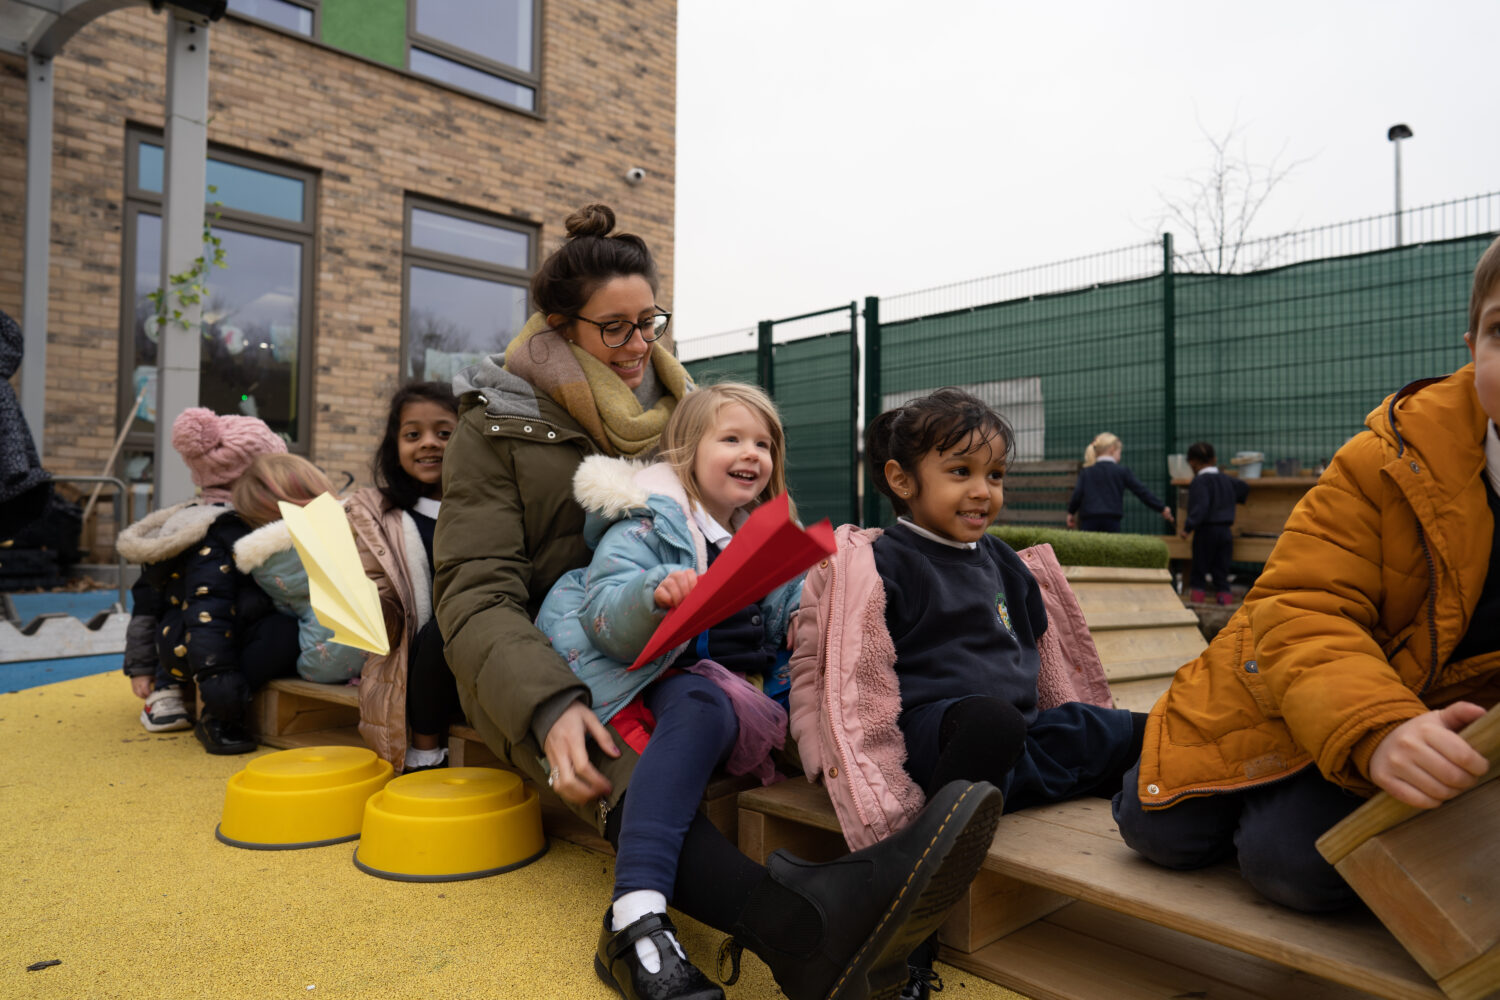 A small group of pupils are seen sat together along a wooden bench, wearing their winter coats, under the supervision of a female member of staff.